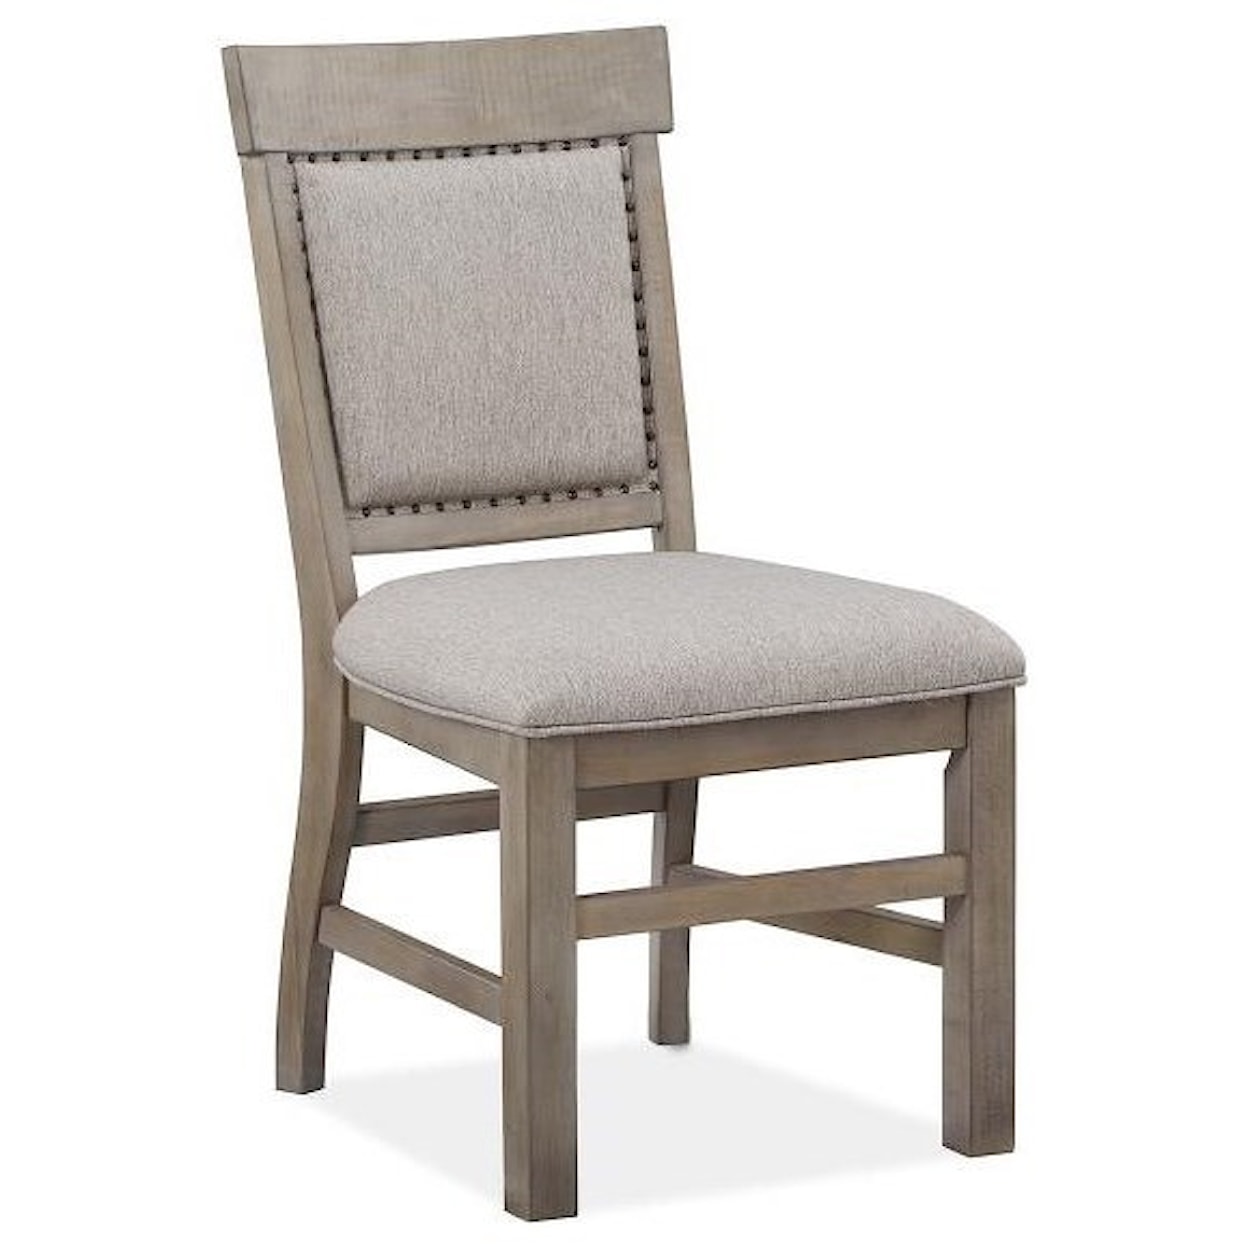 Magnussen Home Tinley Park Dining Dining Side Chair w/Upholstered Seat & Back